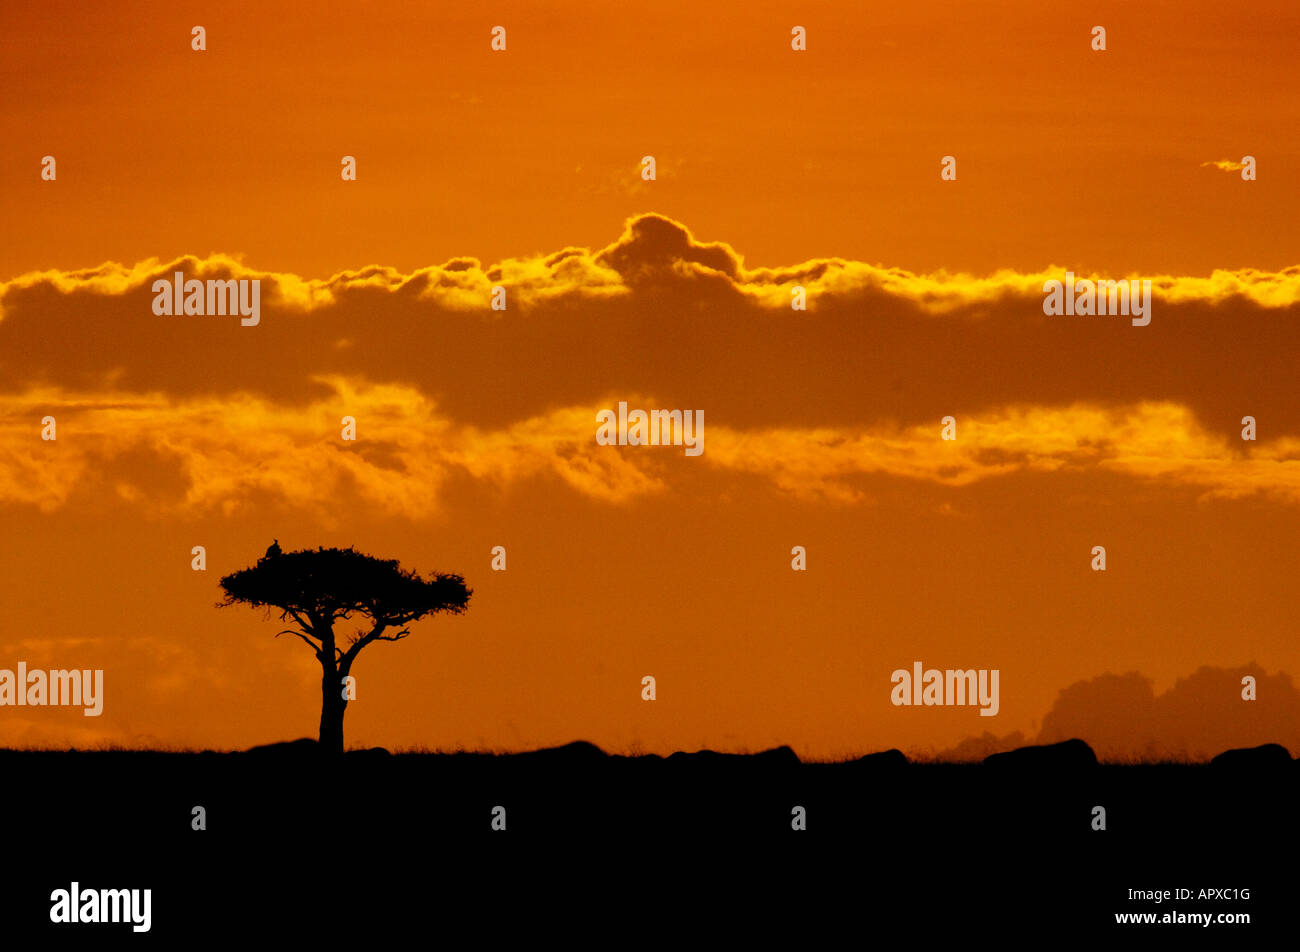 A lone balanites tree silhouetted against a band of illuminated cloud in an orange sky Stock Photo